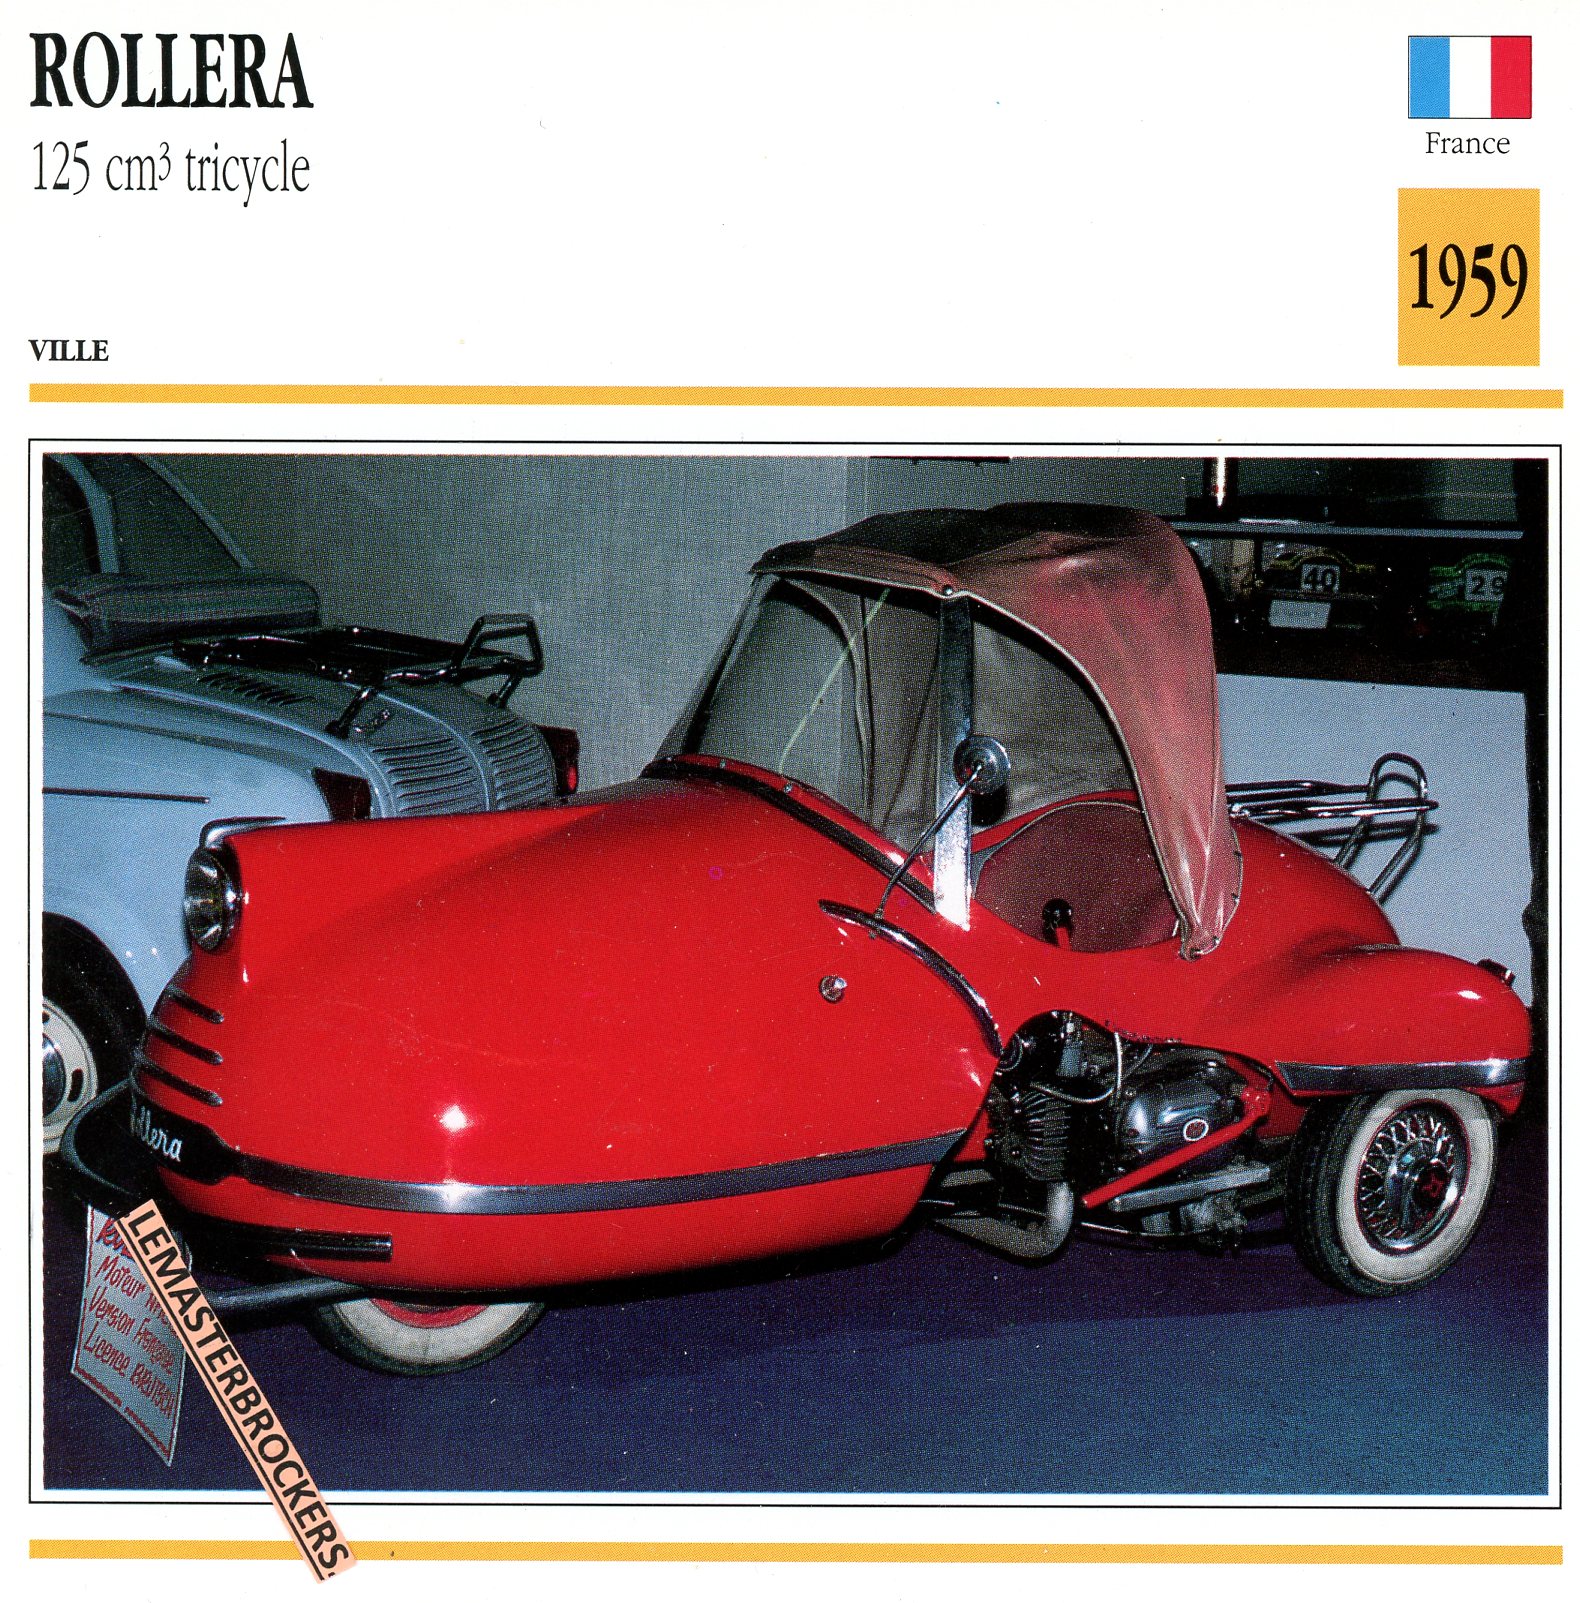 ROLLERA-125-TRICYCLE-1959-LEMASTERBROCKERS-CARD-CARS-FICHE-MICROCAR-VOITURETTE-VINTAGE